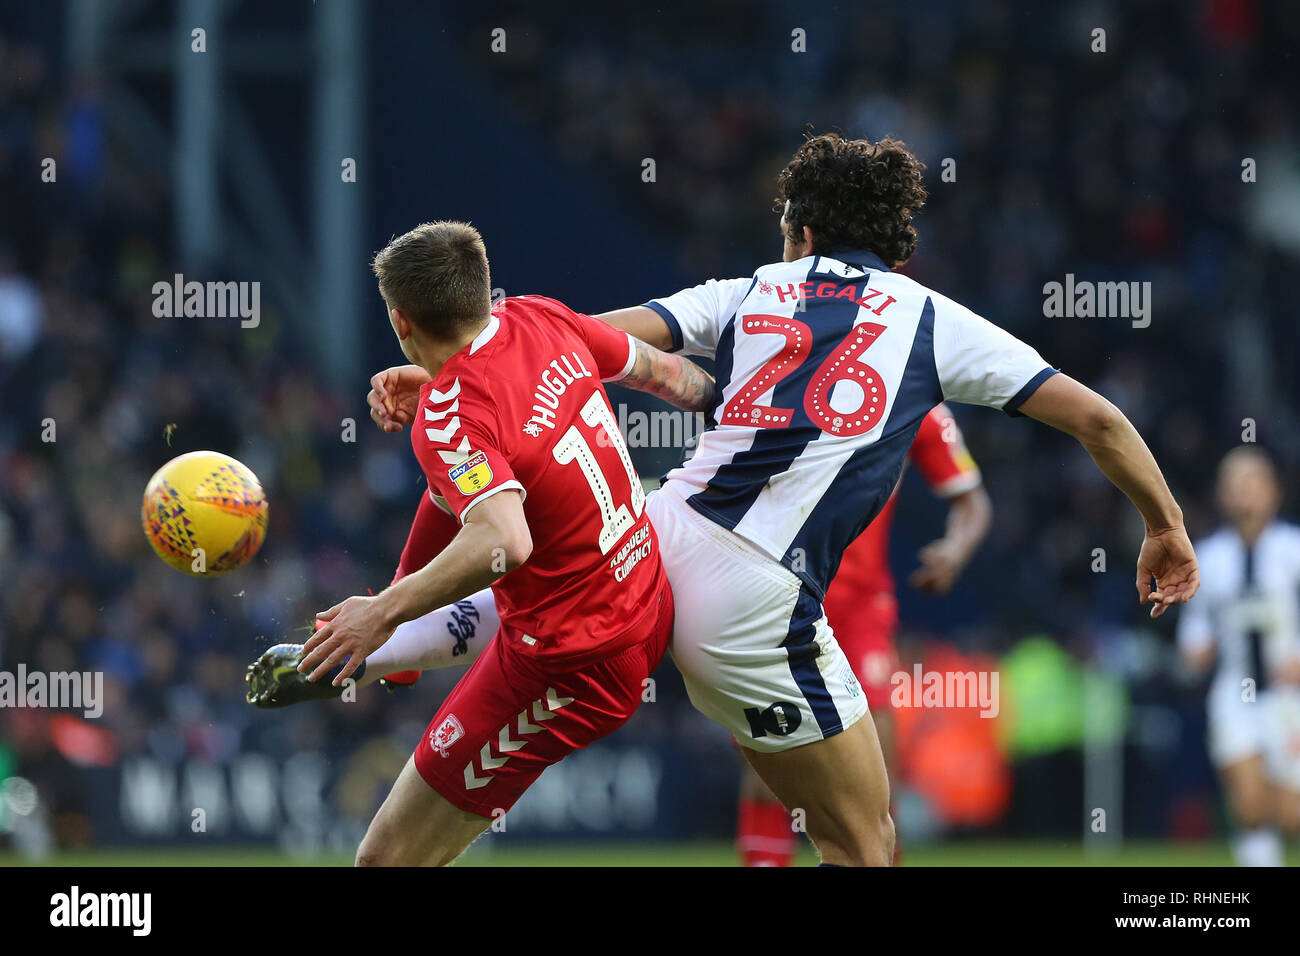 West Bromwich, UK. 2 February 2019.  Ahmed Hegazy of West Bromwich Albion and Jordan Hugillof Middlesbrough during the Sky Bet Championship match between West Bromwich Albion and Middlesbrough at The Hawthorns, West Bromwich on Saturday 2nd February 2019.  (MI News | Alamy) Credit: MI News & Sport /Alamy Live News Stock Photo